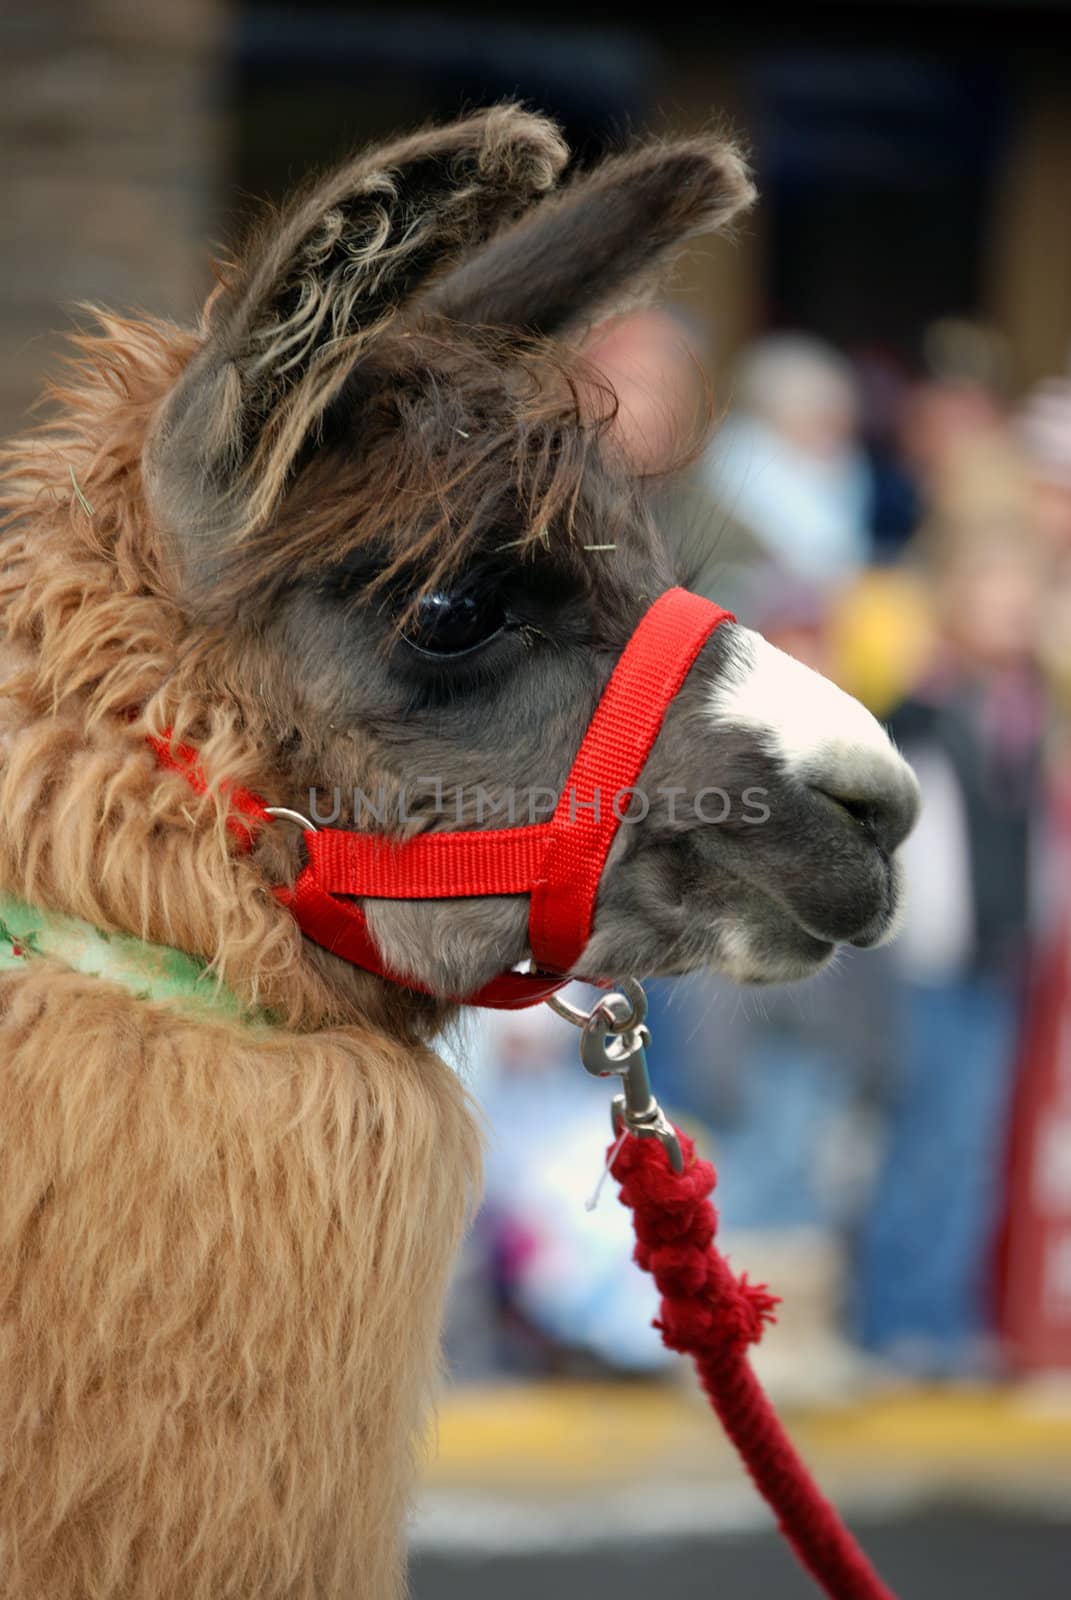 Vertical image of a brown llama wearing a red halter - taken in a parade.